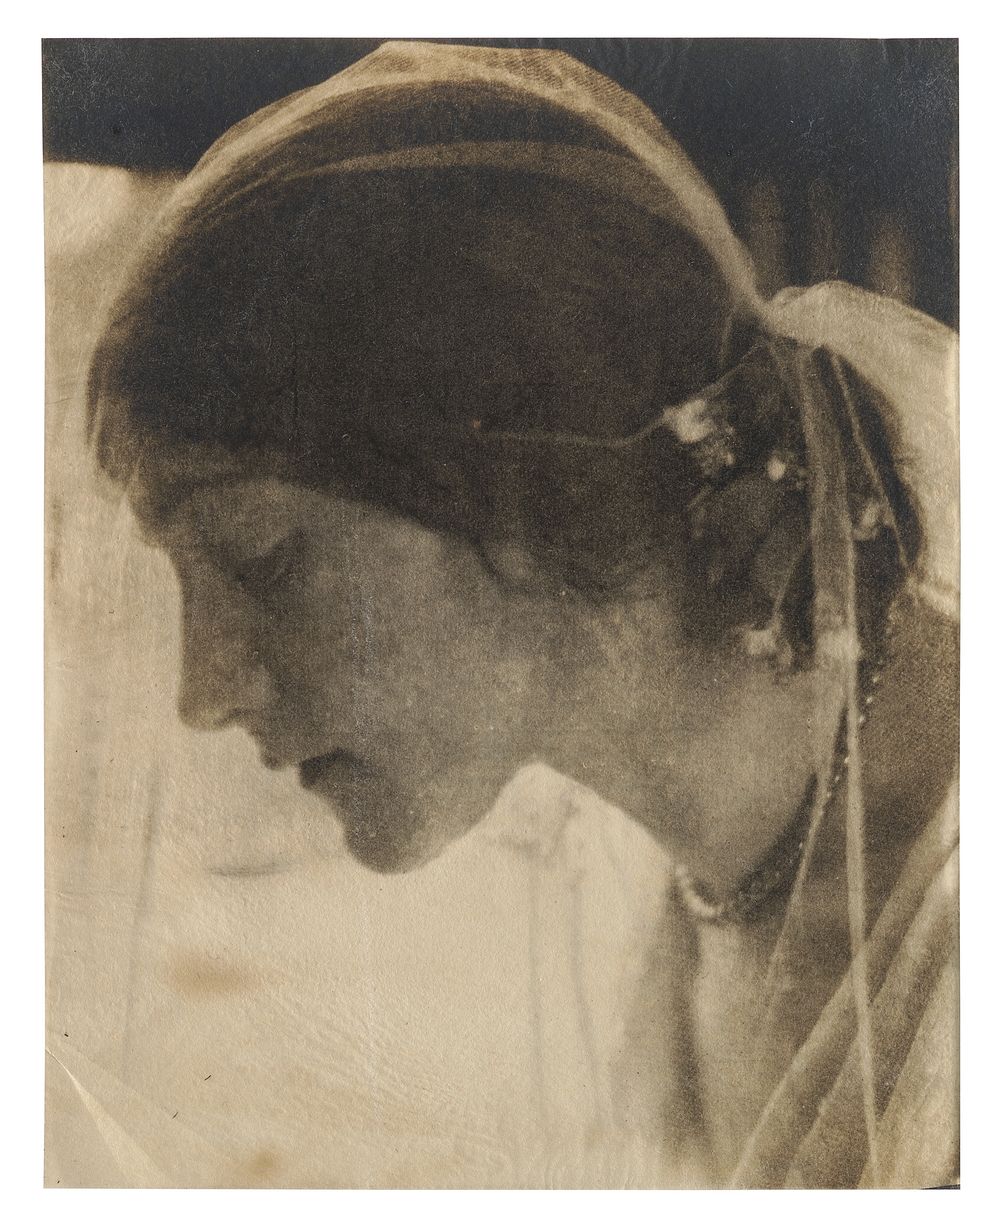 Profile Study of a Young Woman by Gertrude Kasebier